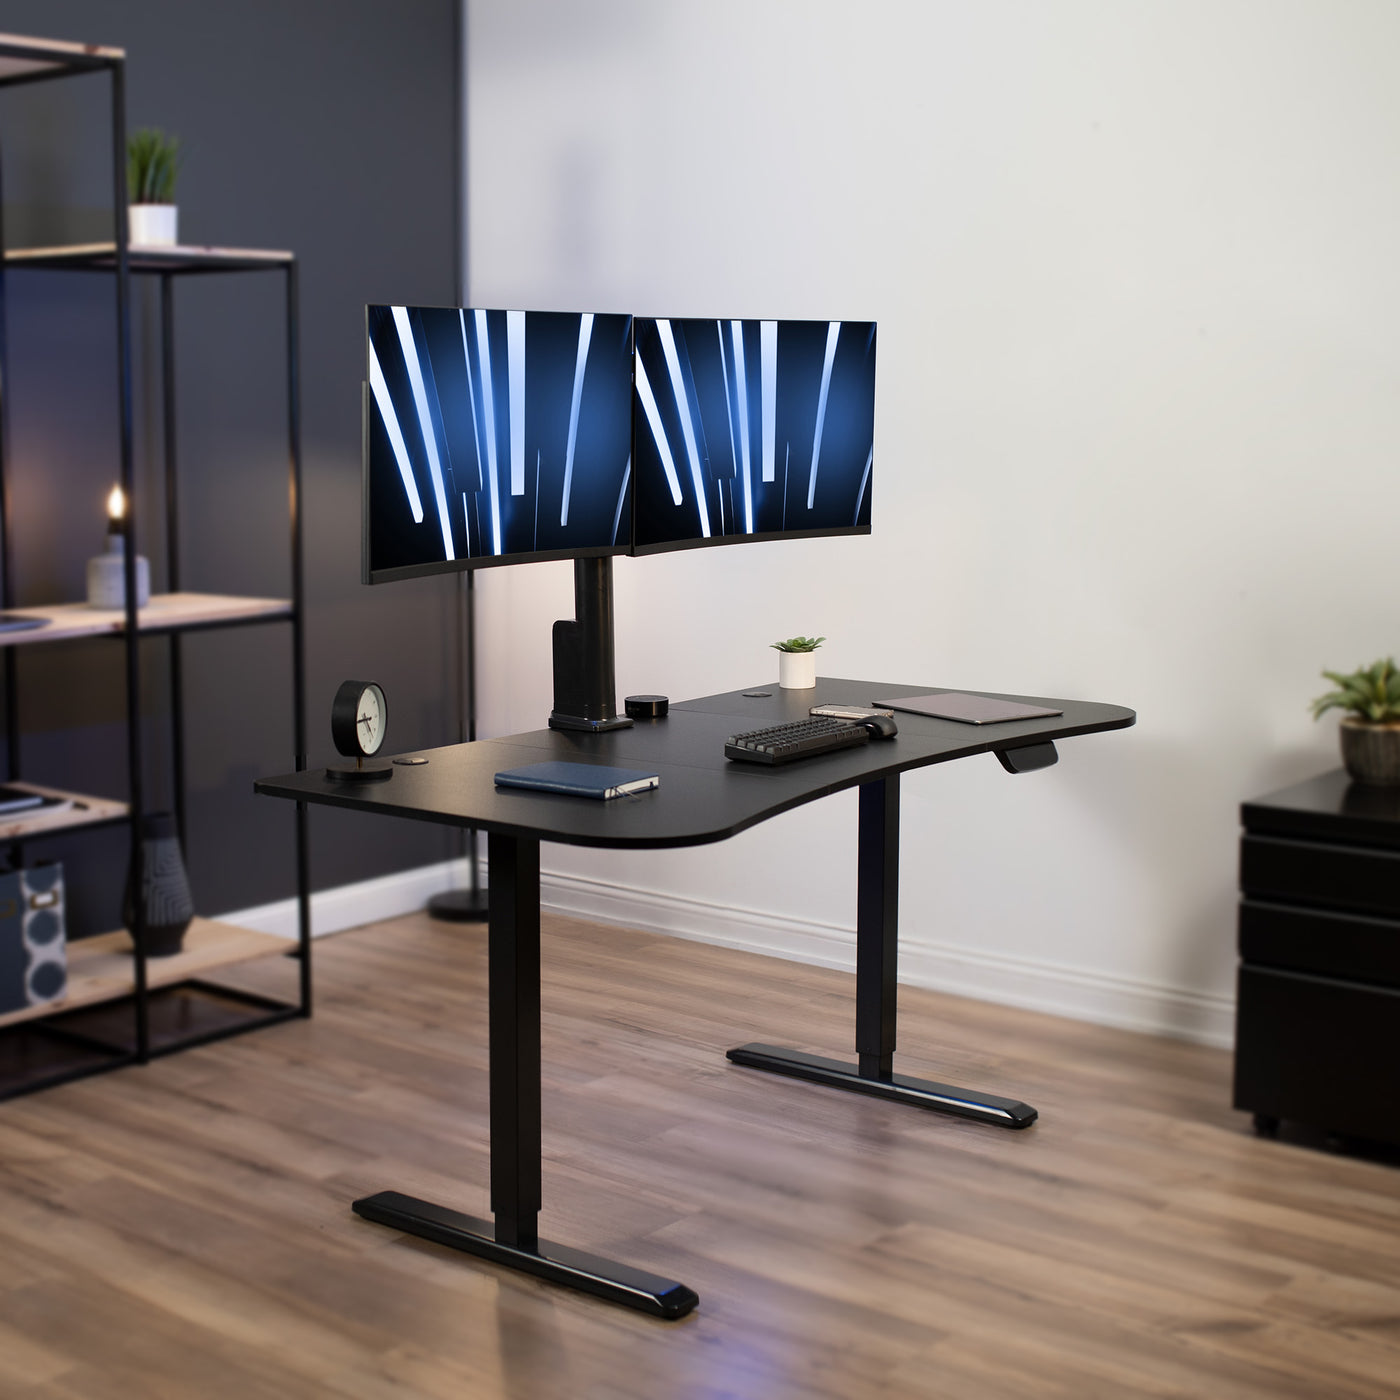 Dual monitor mount desk from VIVO.